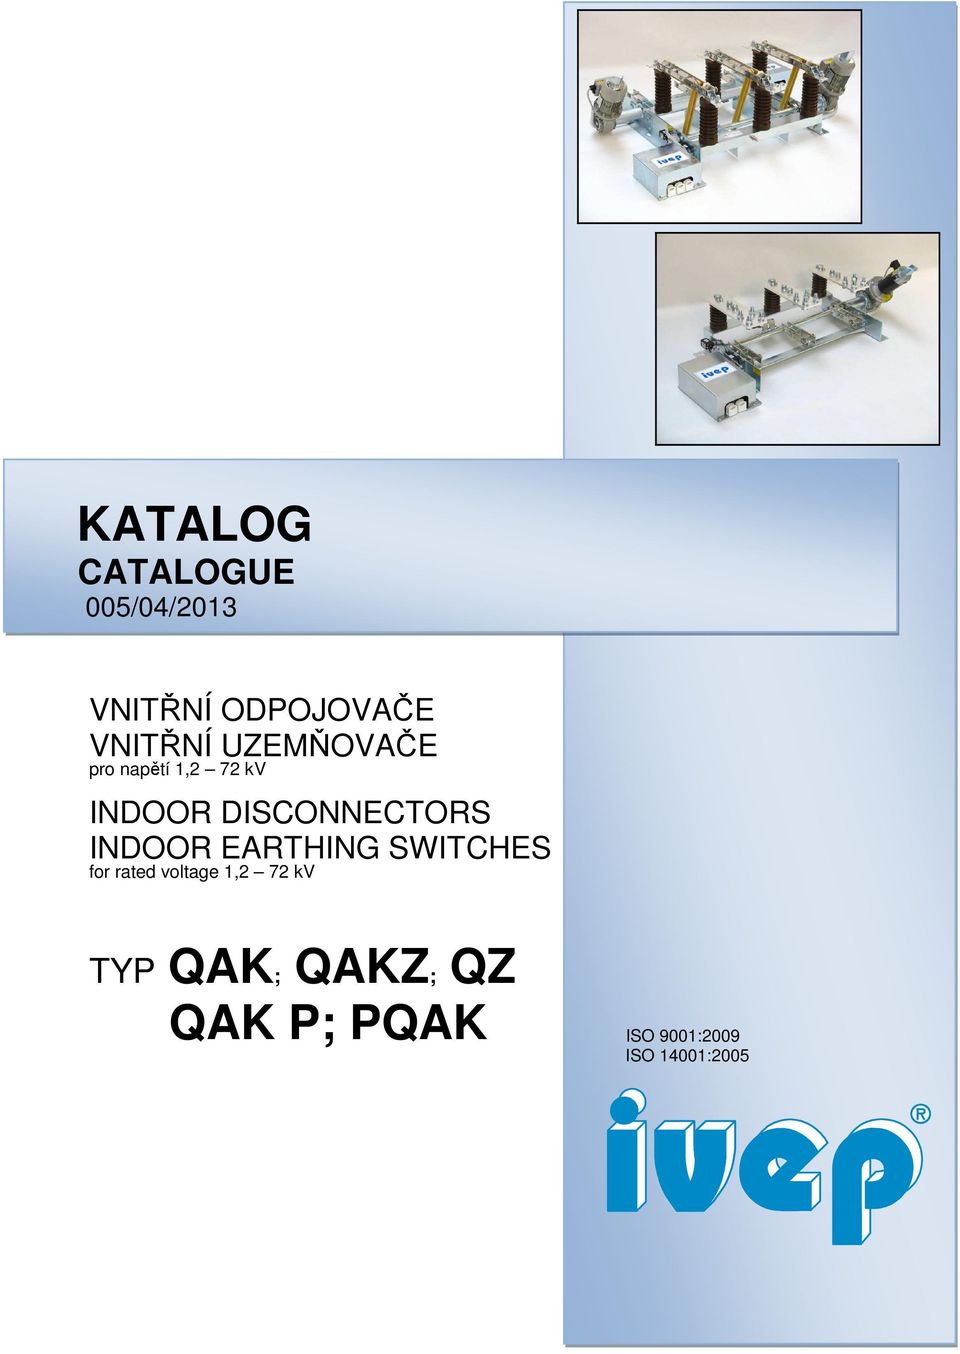 DISCONNECTORS INDOOR EARTHING SWITCHES for rated